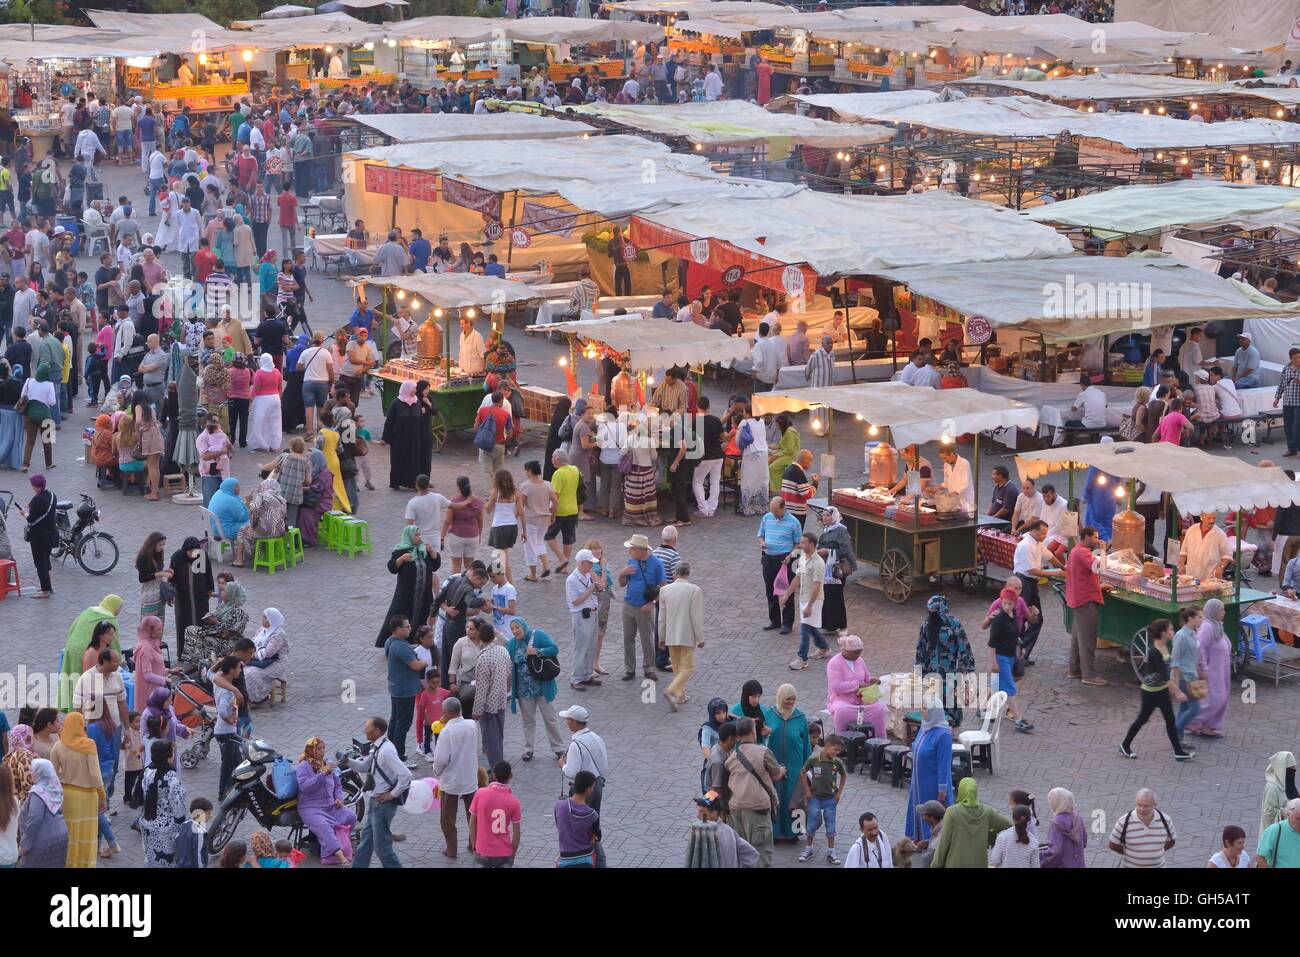 geography / travel, Morocco, food stands, eating stalls on the Djemaa El Fna, marketplace, Marrakech, region Marrakesh-Tensift-El Haouz, Africa, Additional-Rights-Clearance-Info-Not-Available Stock Photo